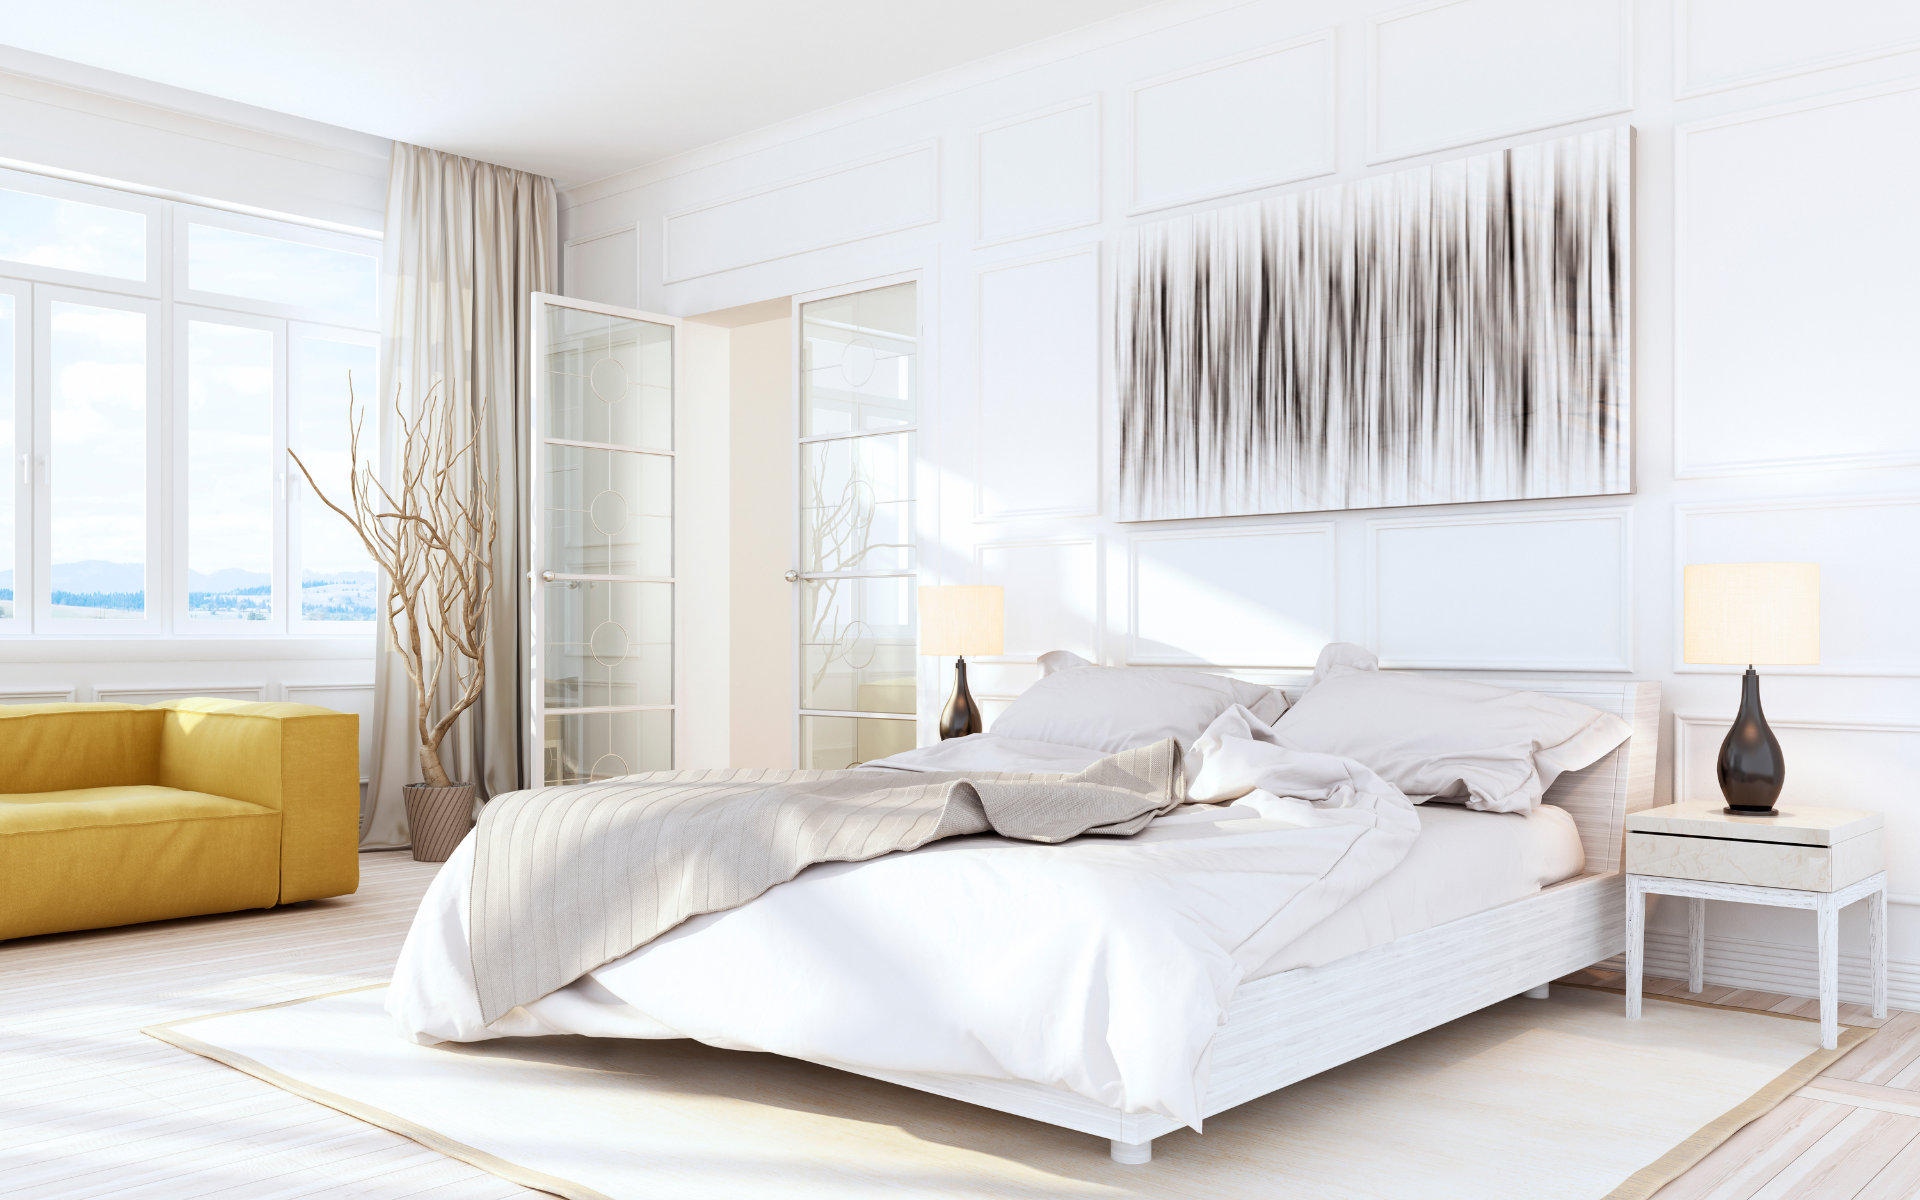 Are you giving buyers a sleepless night with these bedroom staging mistakes?